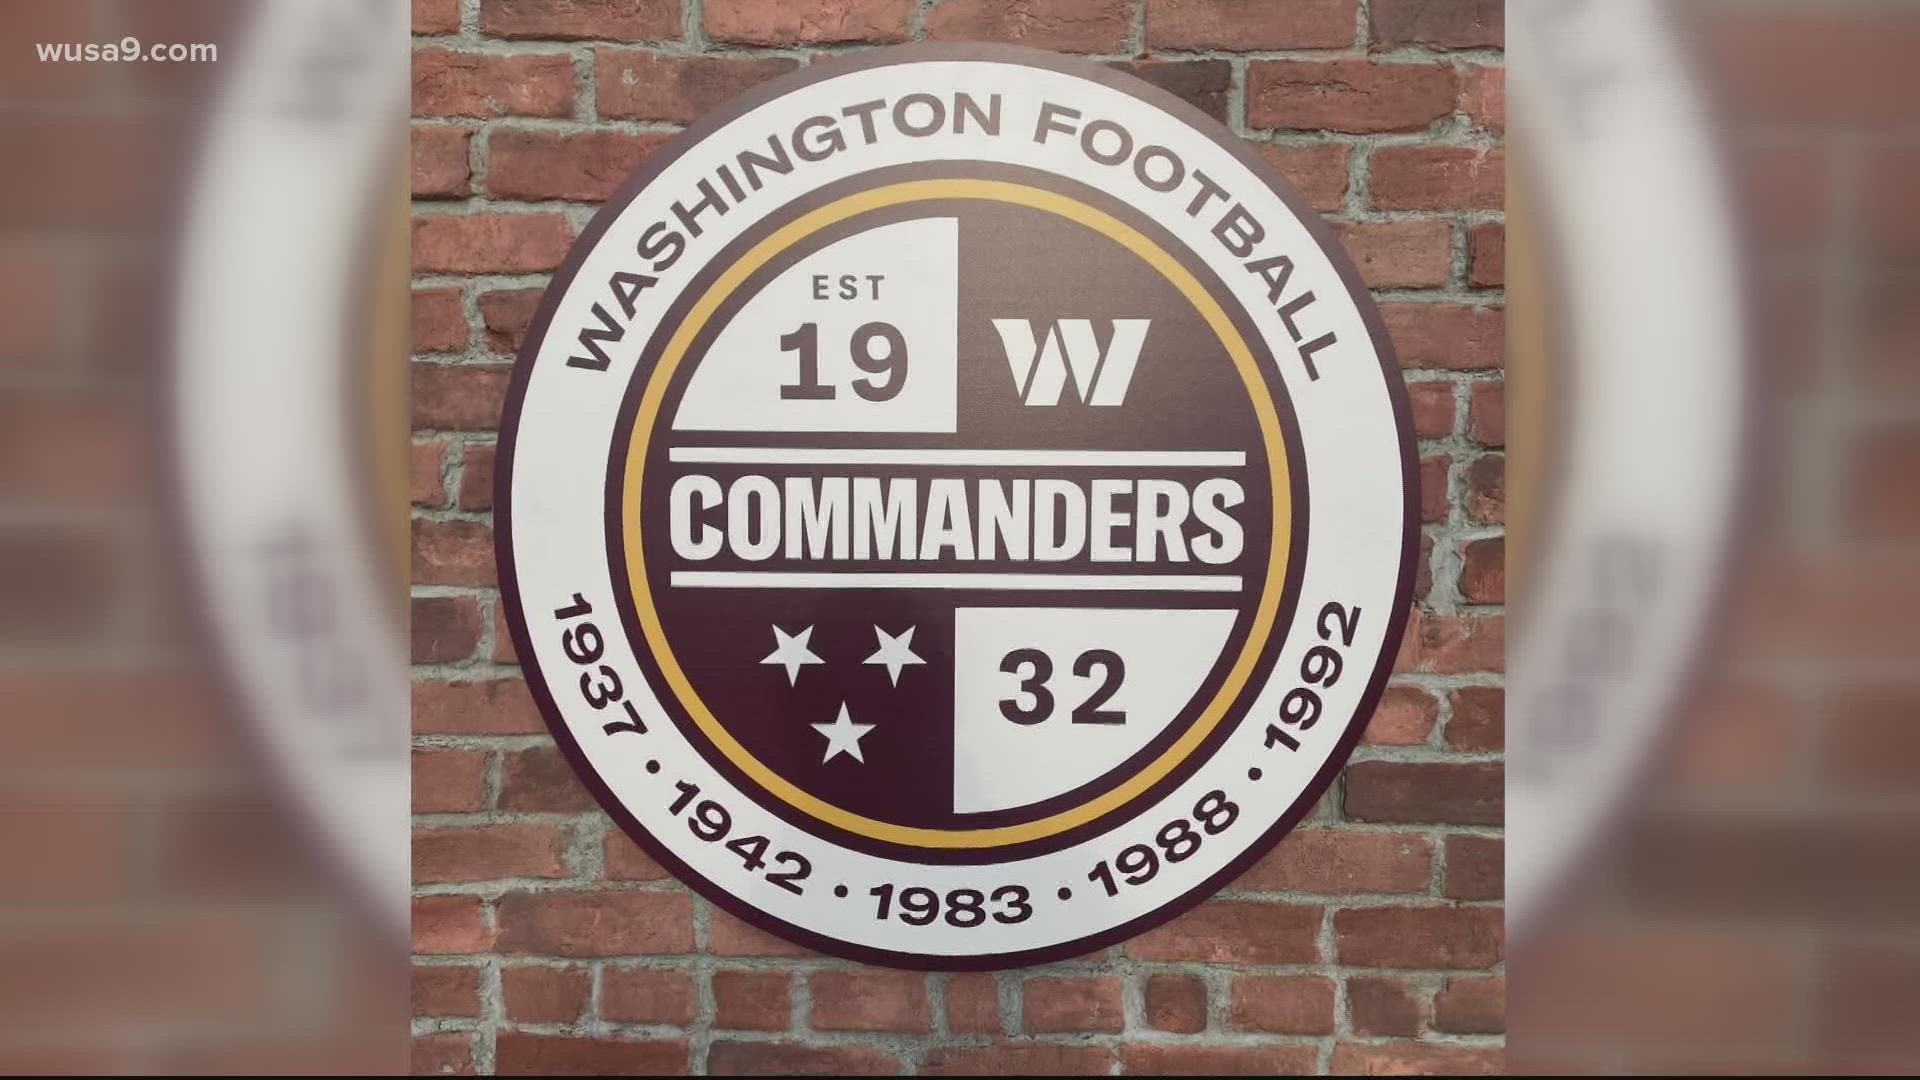 After weeks of speculation, and a two-year journey to choosing a new name, Washington officially has a new team to root for. Say hello to the Washington Commanders.